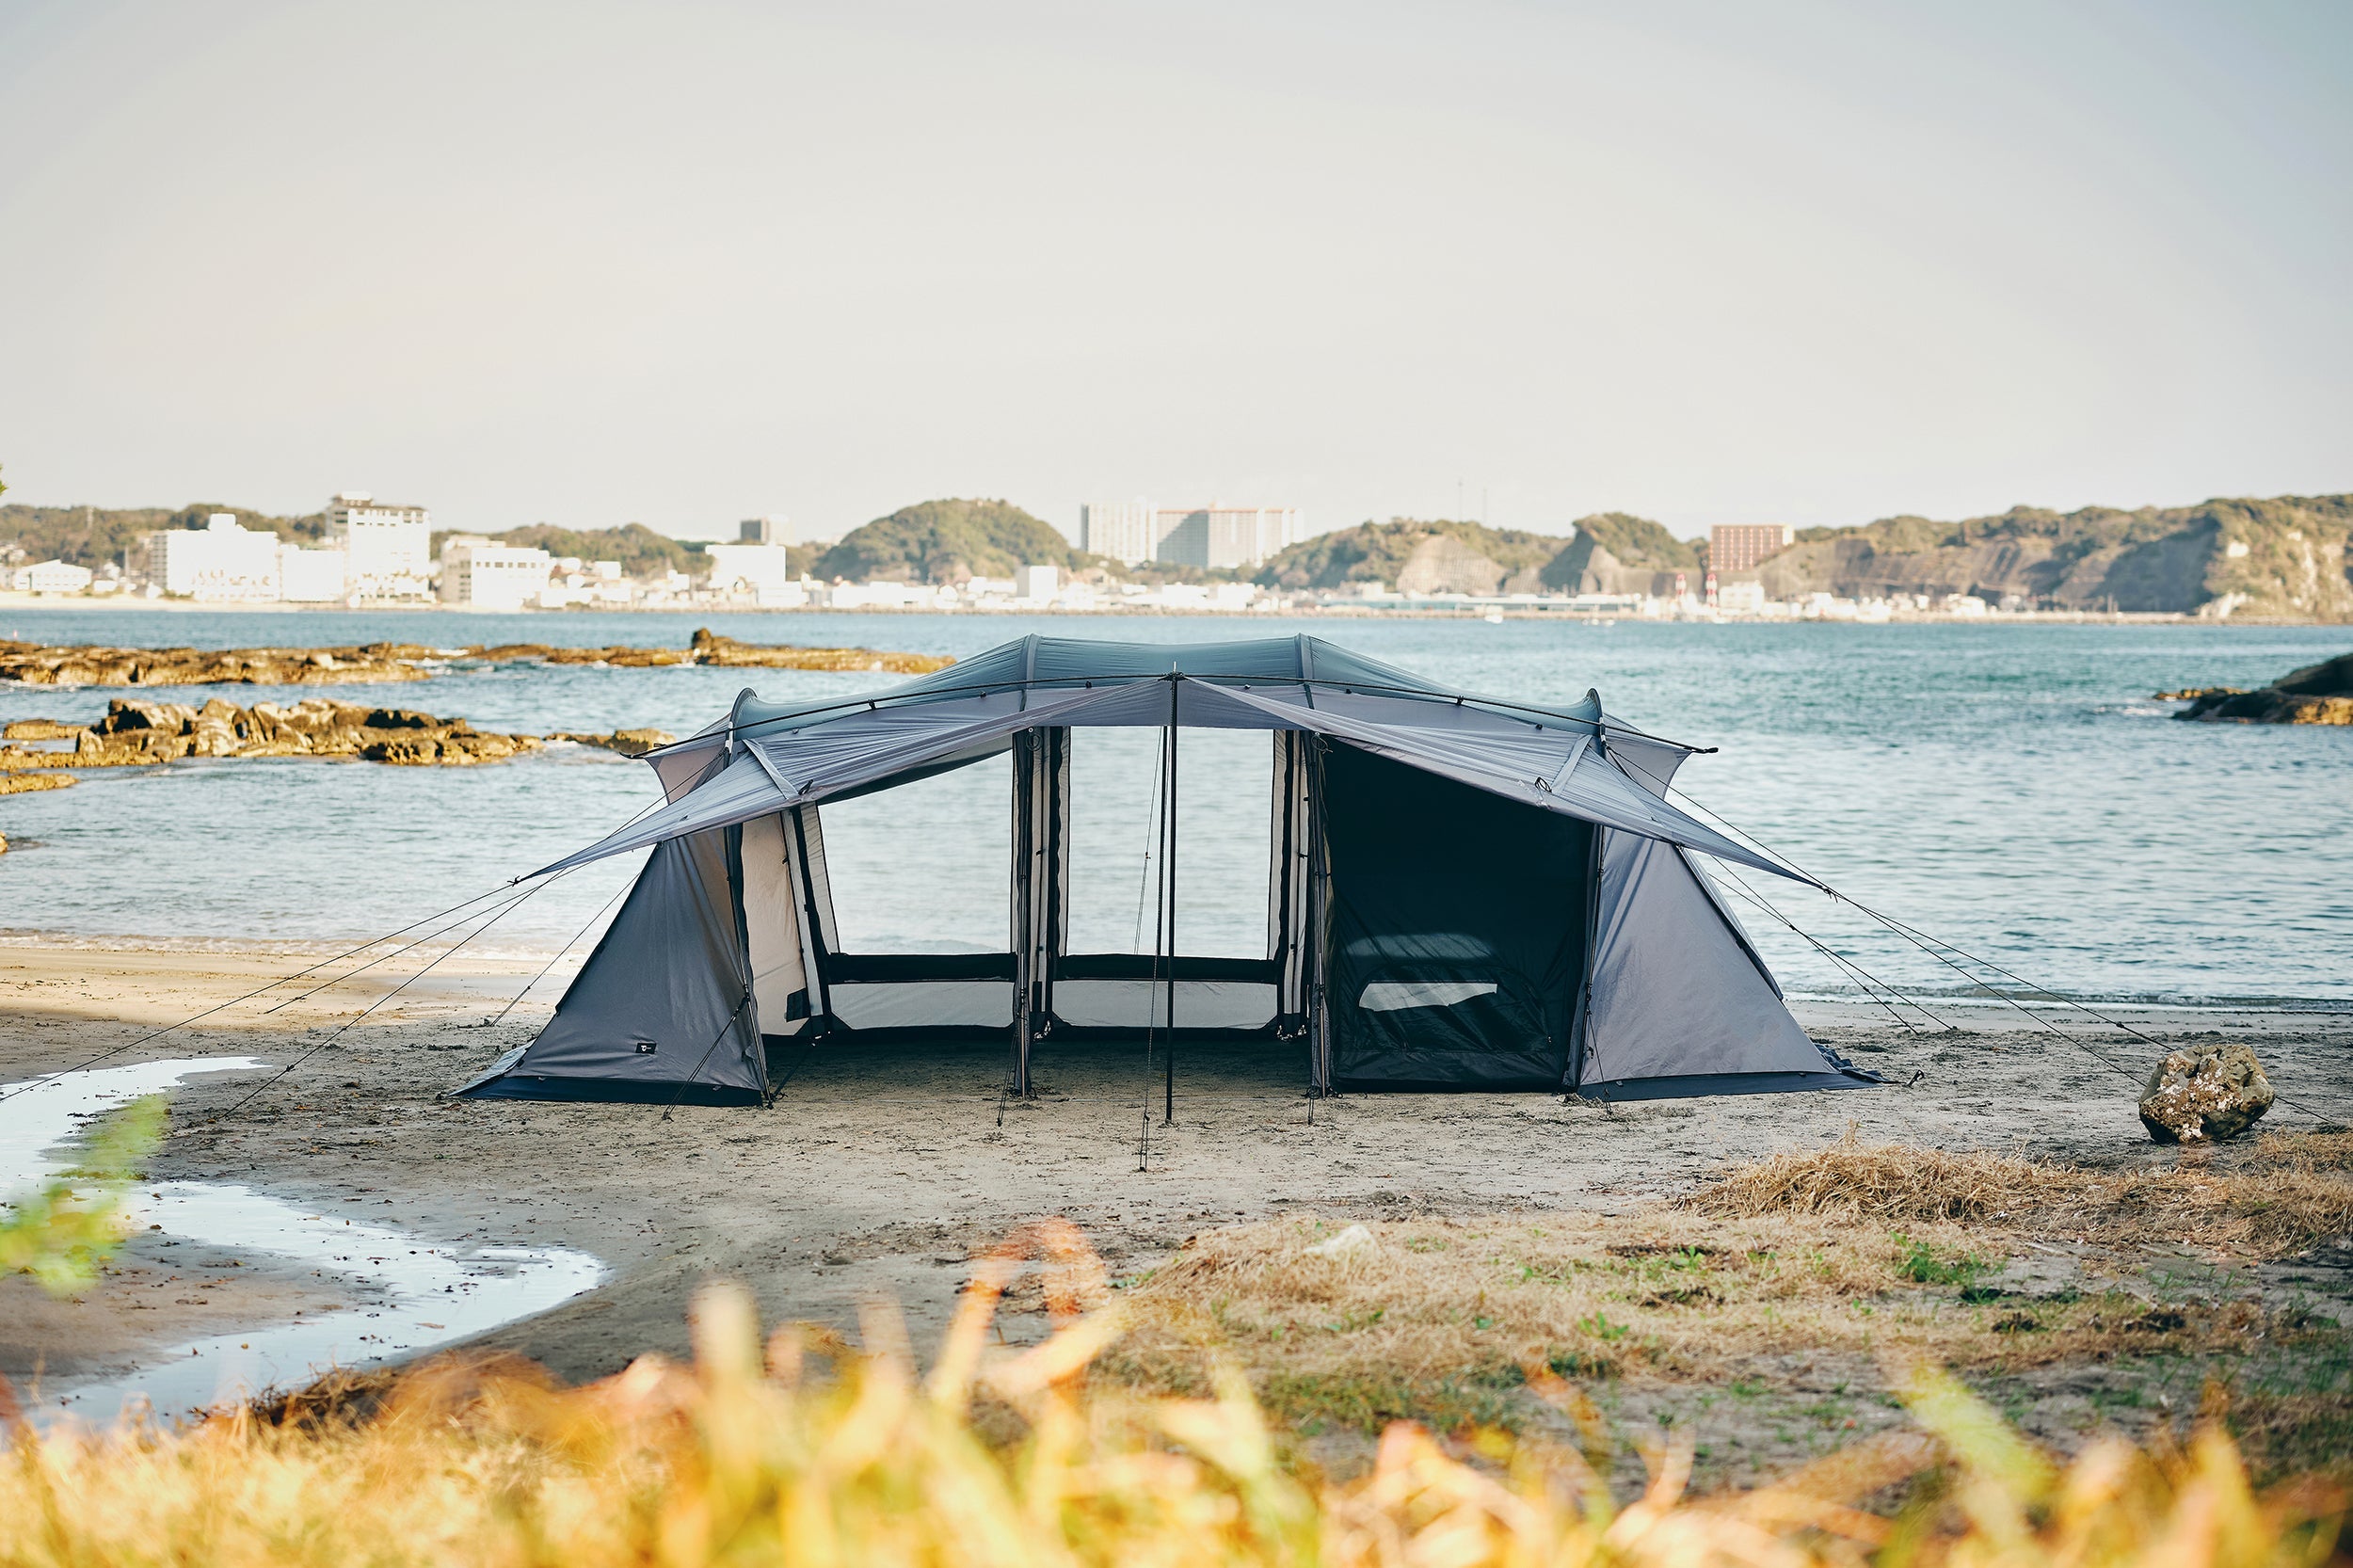 Wing Fort (Inner tent for 4 people included) 開発者の想い